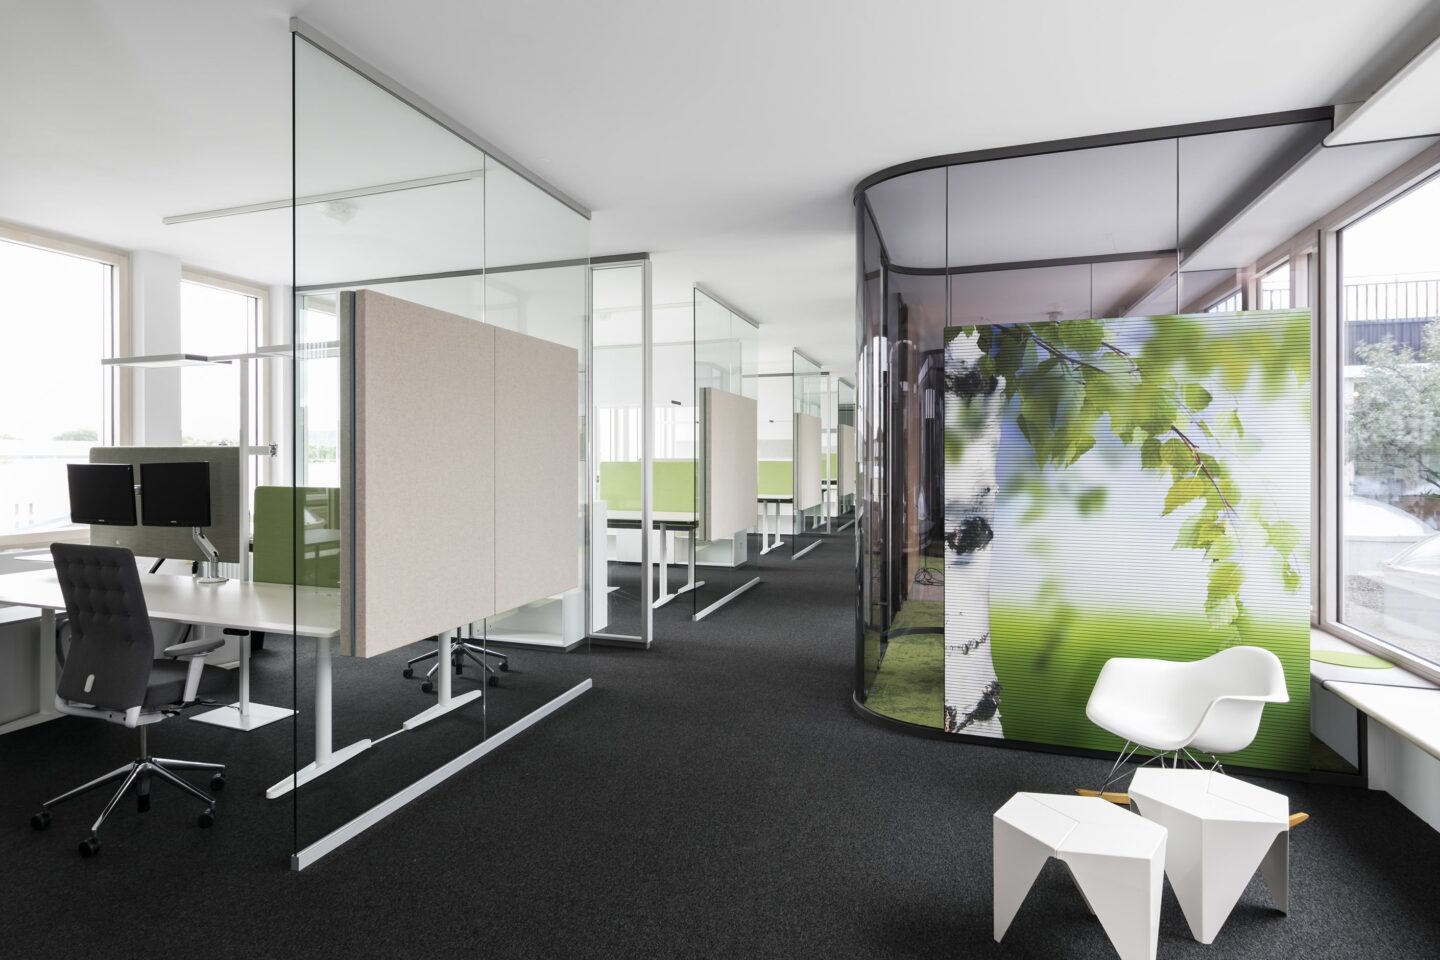 IdeenReich at feco-forum Karlsruhe │ system walls from feco │ glass elements